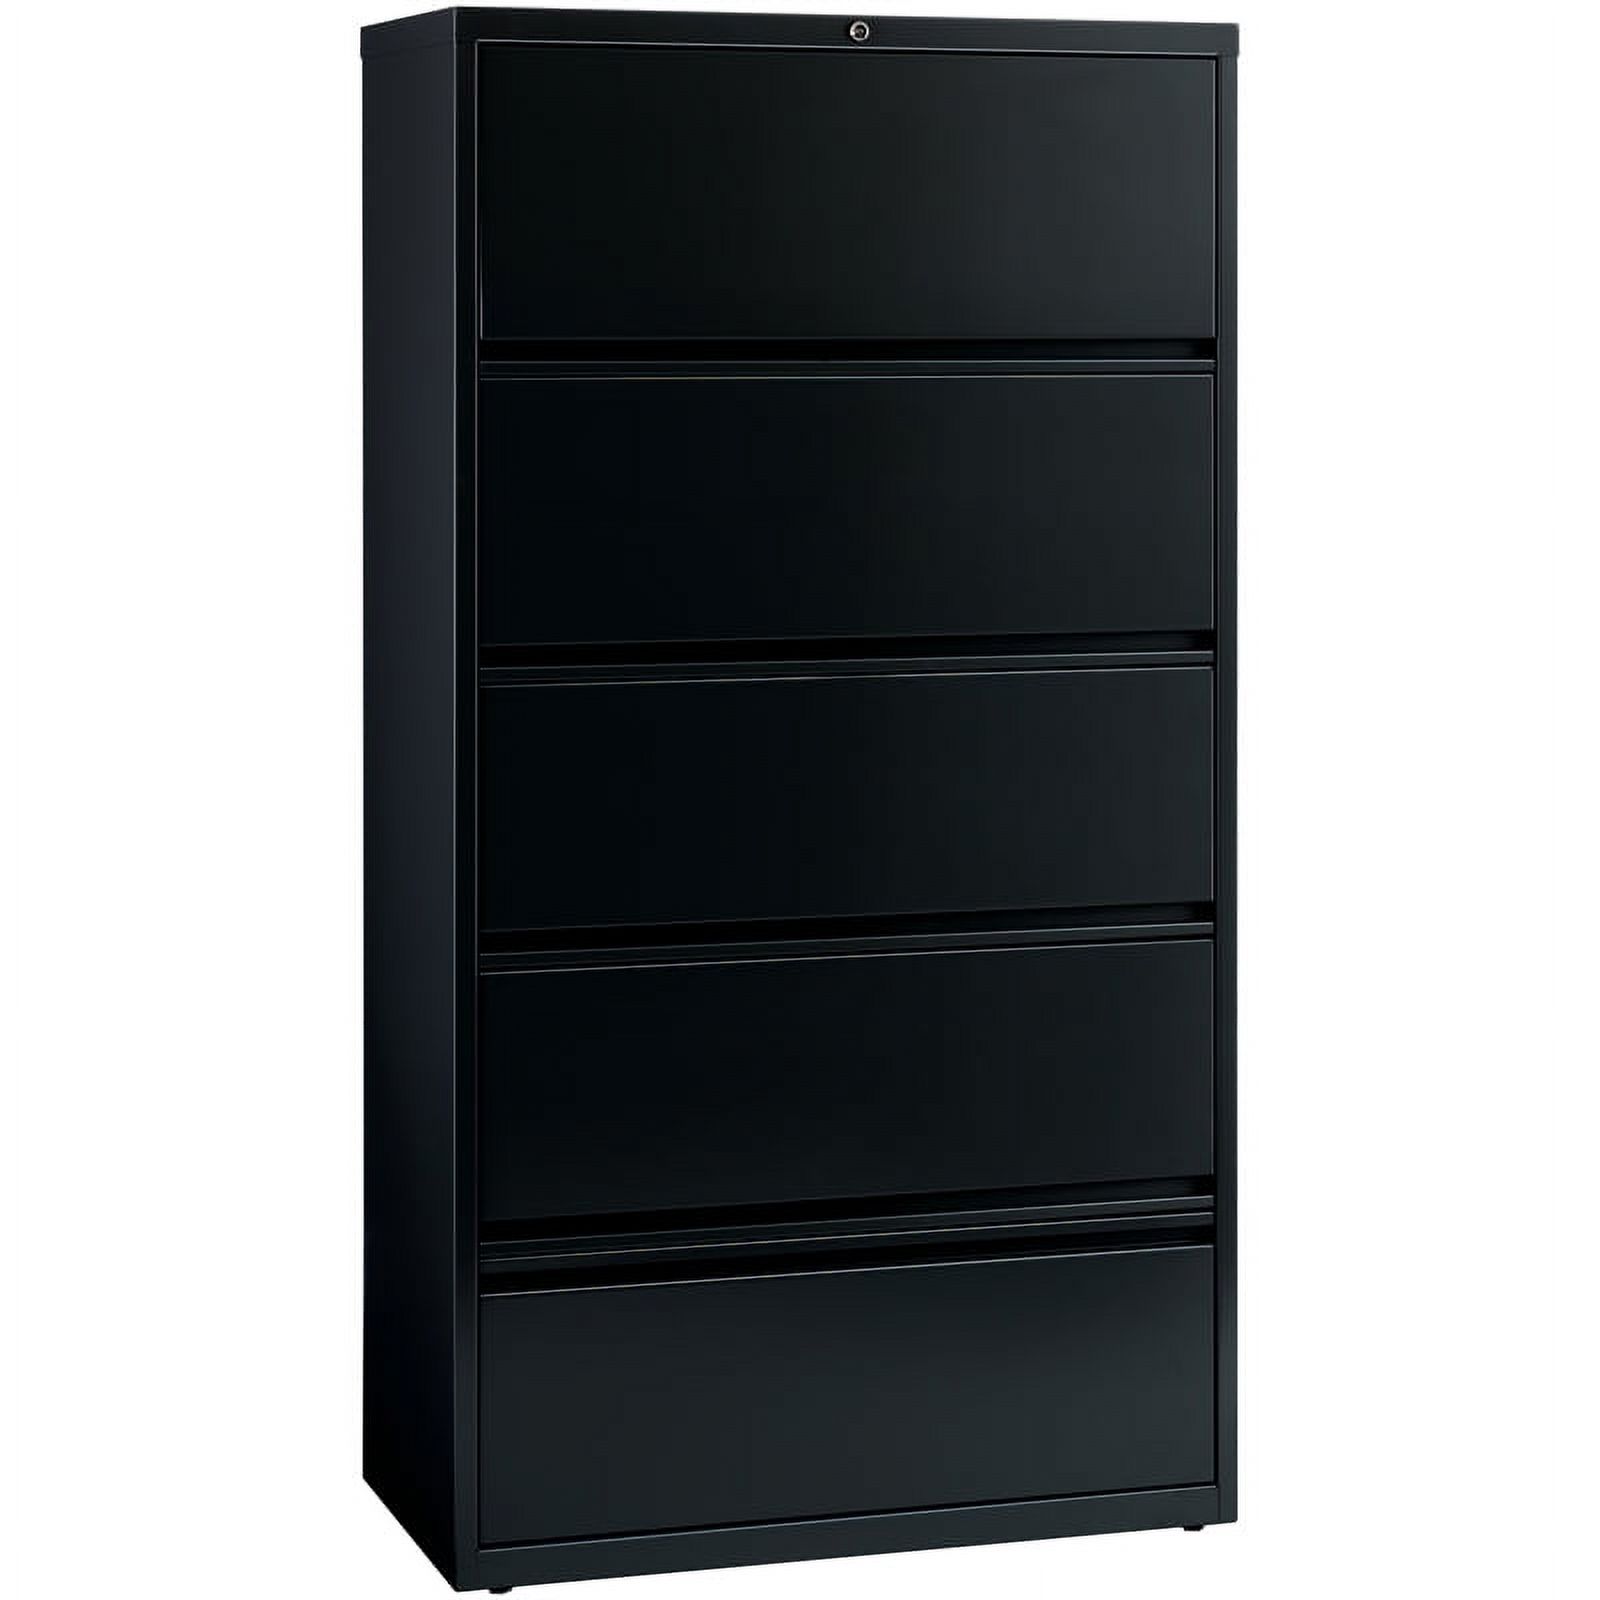 Scranton & Co 36" 5-Drawer Contemporary Metal Lateral File Cabinet in Black - image 1 of 2